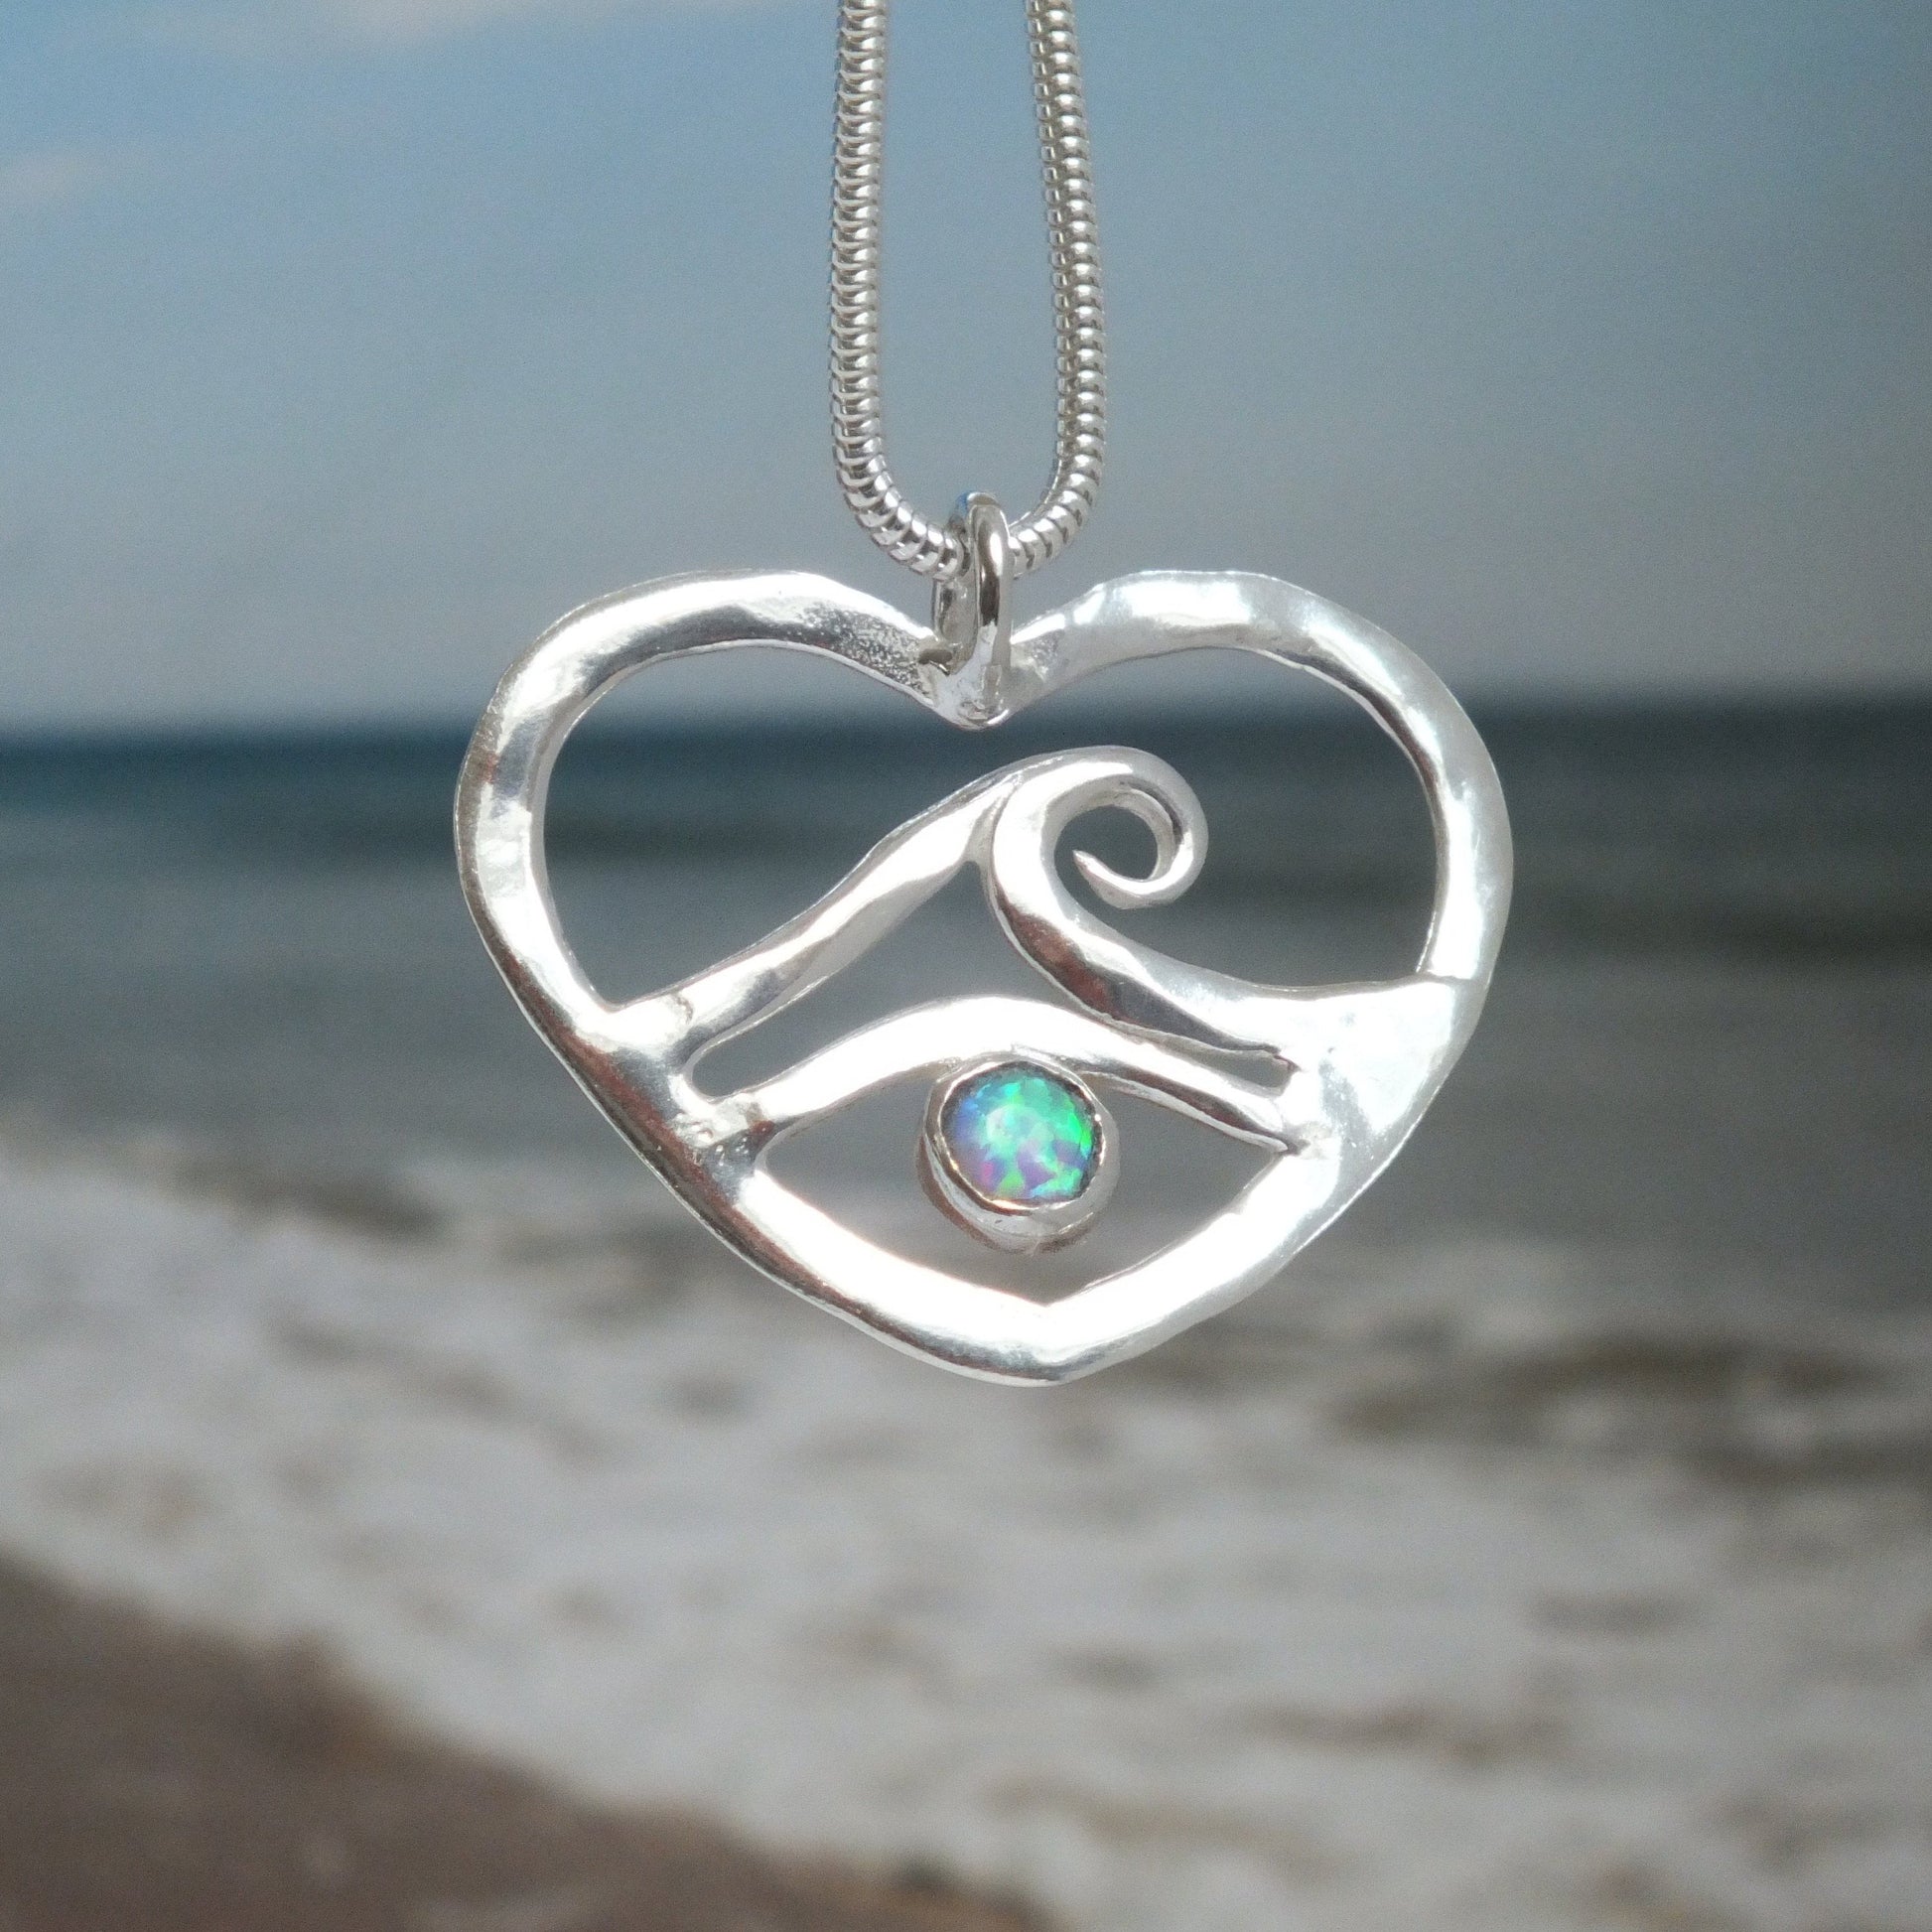 Wave and heart necklace by Pa-pa jewellery